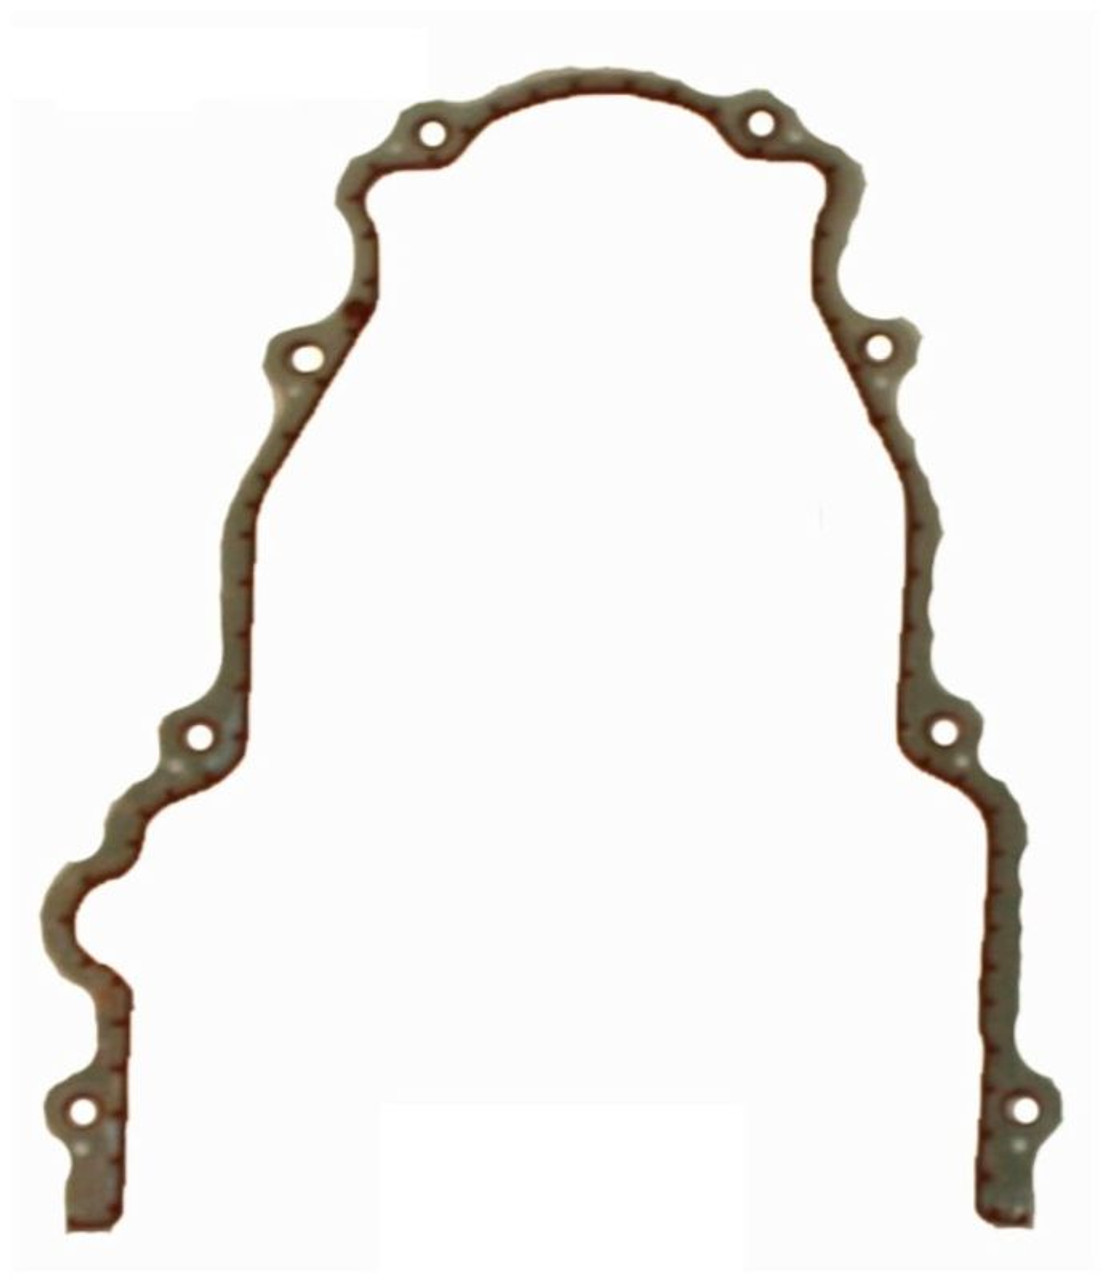 2009 Chevrolet Express 1500 5.3L Engine Timing Cover Gasket TCG293-A -554